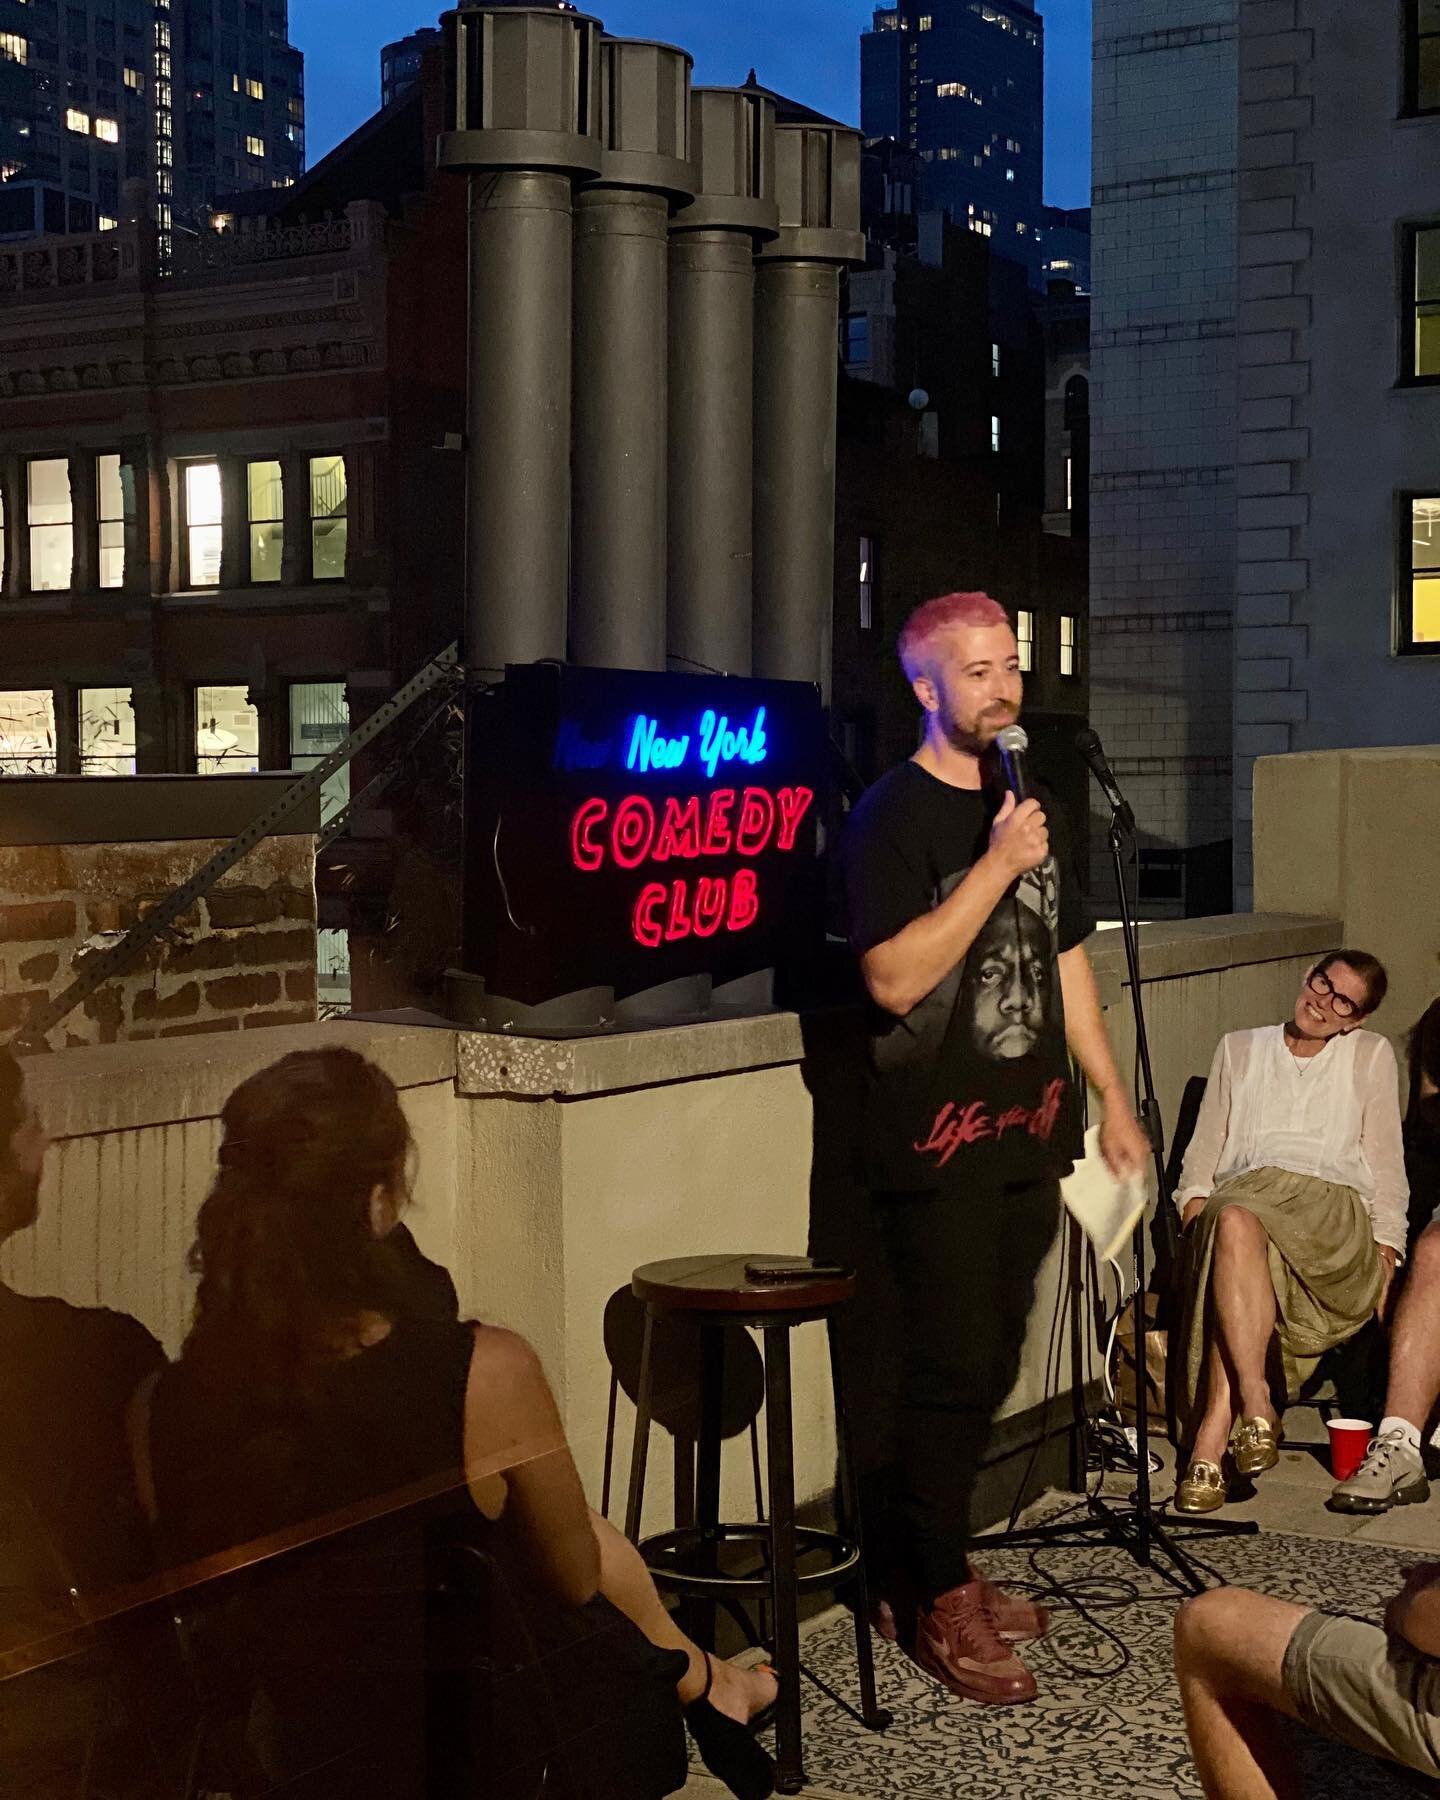 Nightly (socially distant) stand-up at the Flatiron Penthouse in collaboration with the @nycomedyclub ! Join us for some #laughtertherapy - link in bio for showtimes &amp; tickets